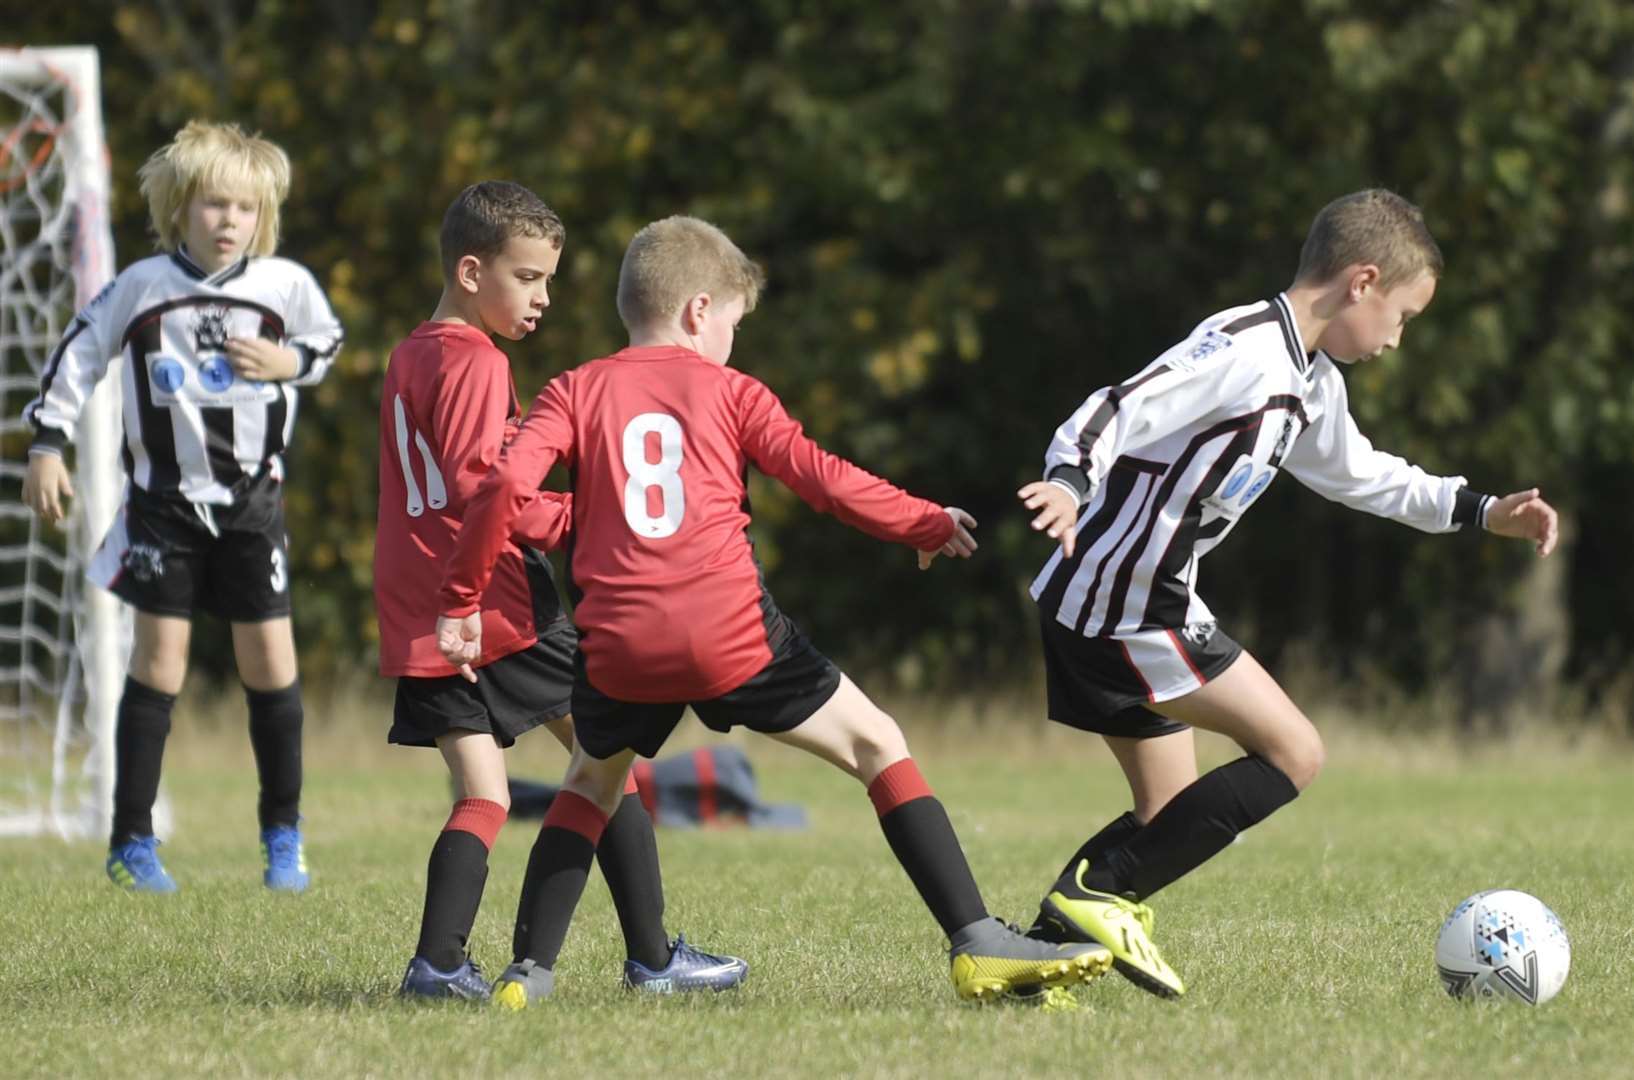 Rainham Kenilworth under-9s (red) double up against Milton & Fulston United under-9s on Sunday. Picture: Barry Goodwin (42331483)